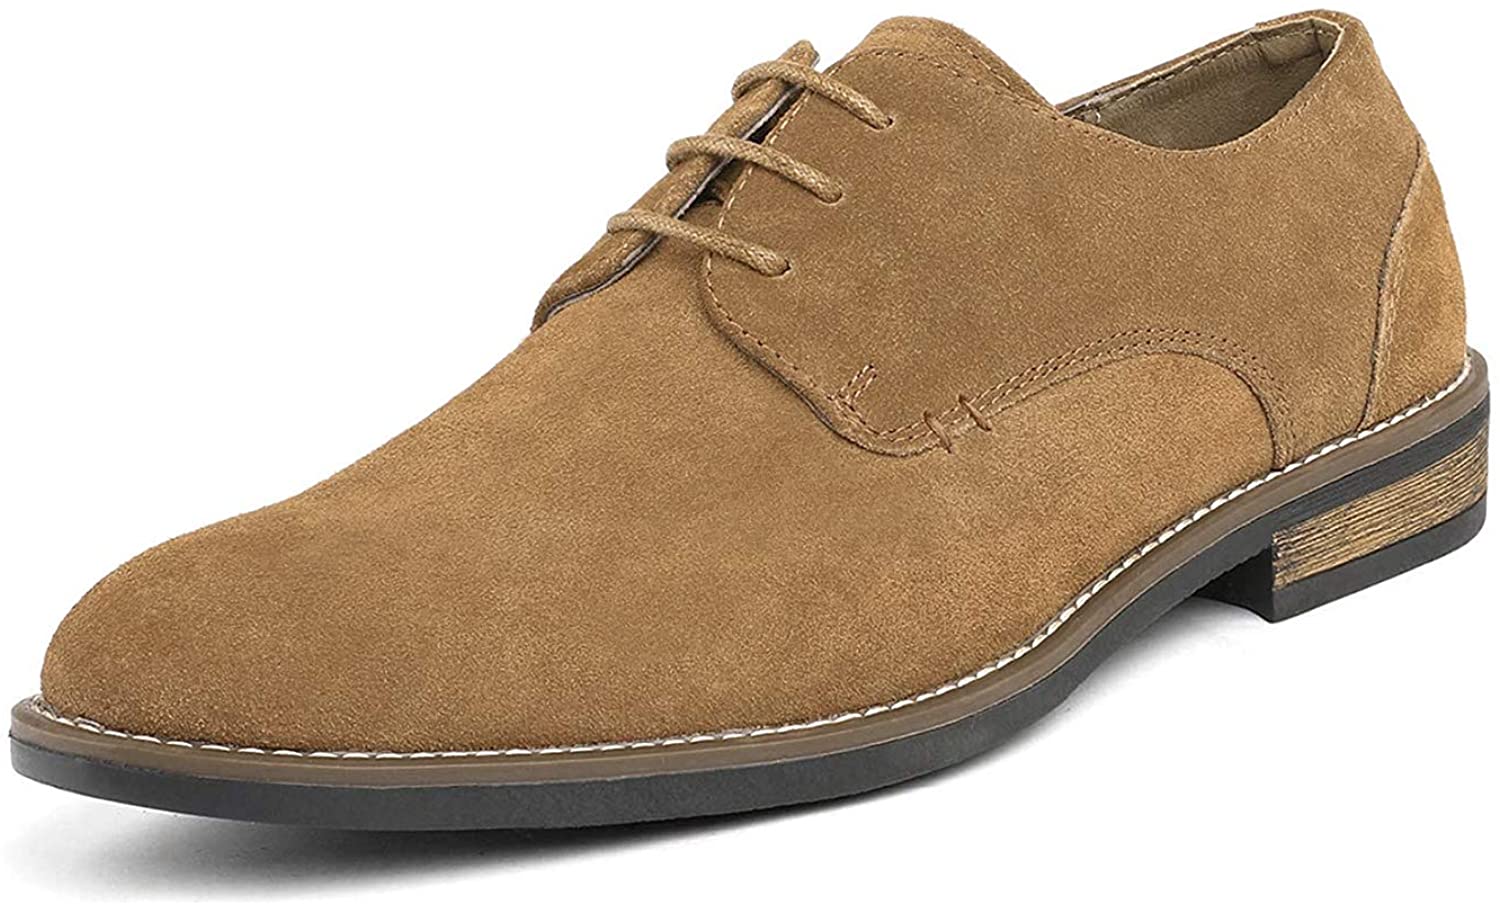 Bruno Marc Men’s Urban Suede Leather Lace Up Oxford Shoes